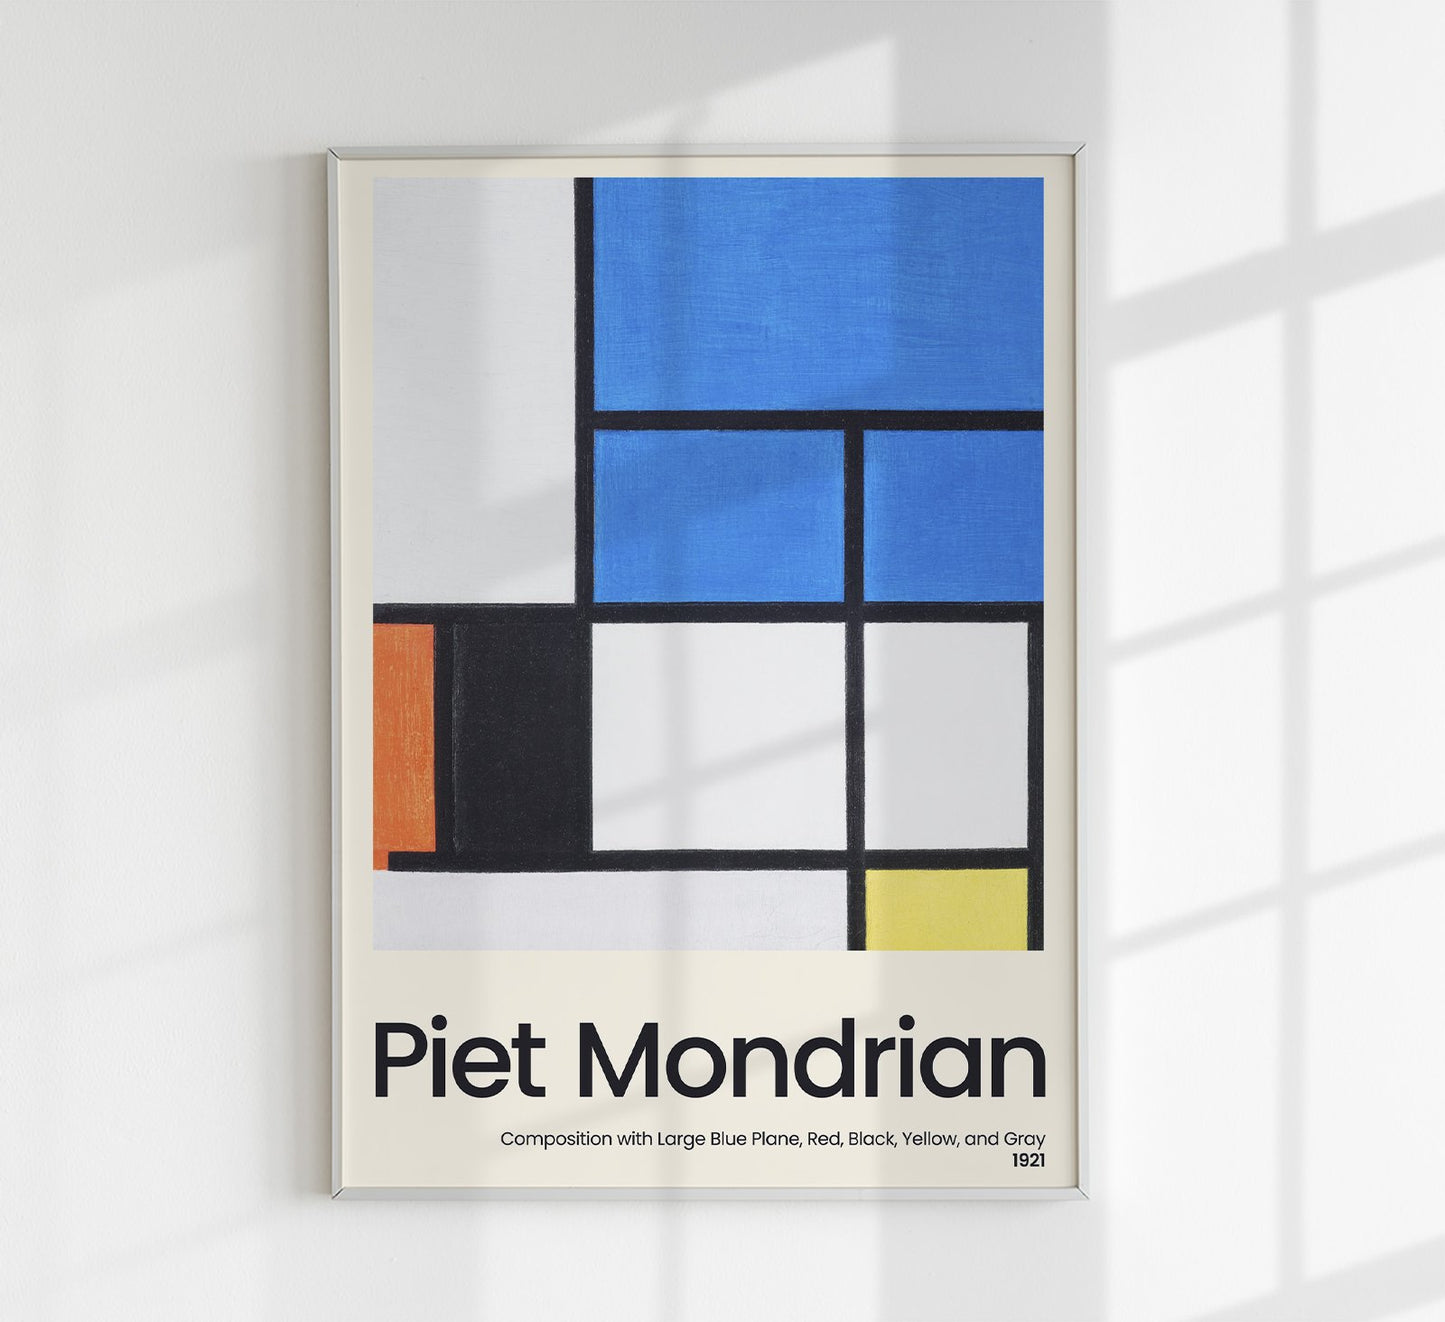 Composition with Large Blue Plane By Piet Mondrian Exhibition Poster